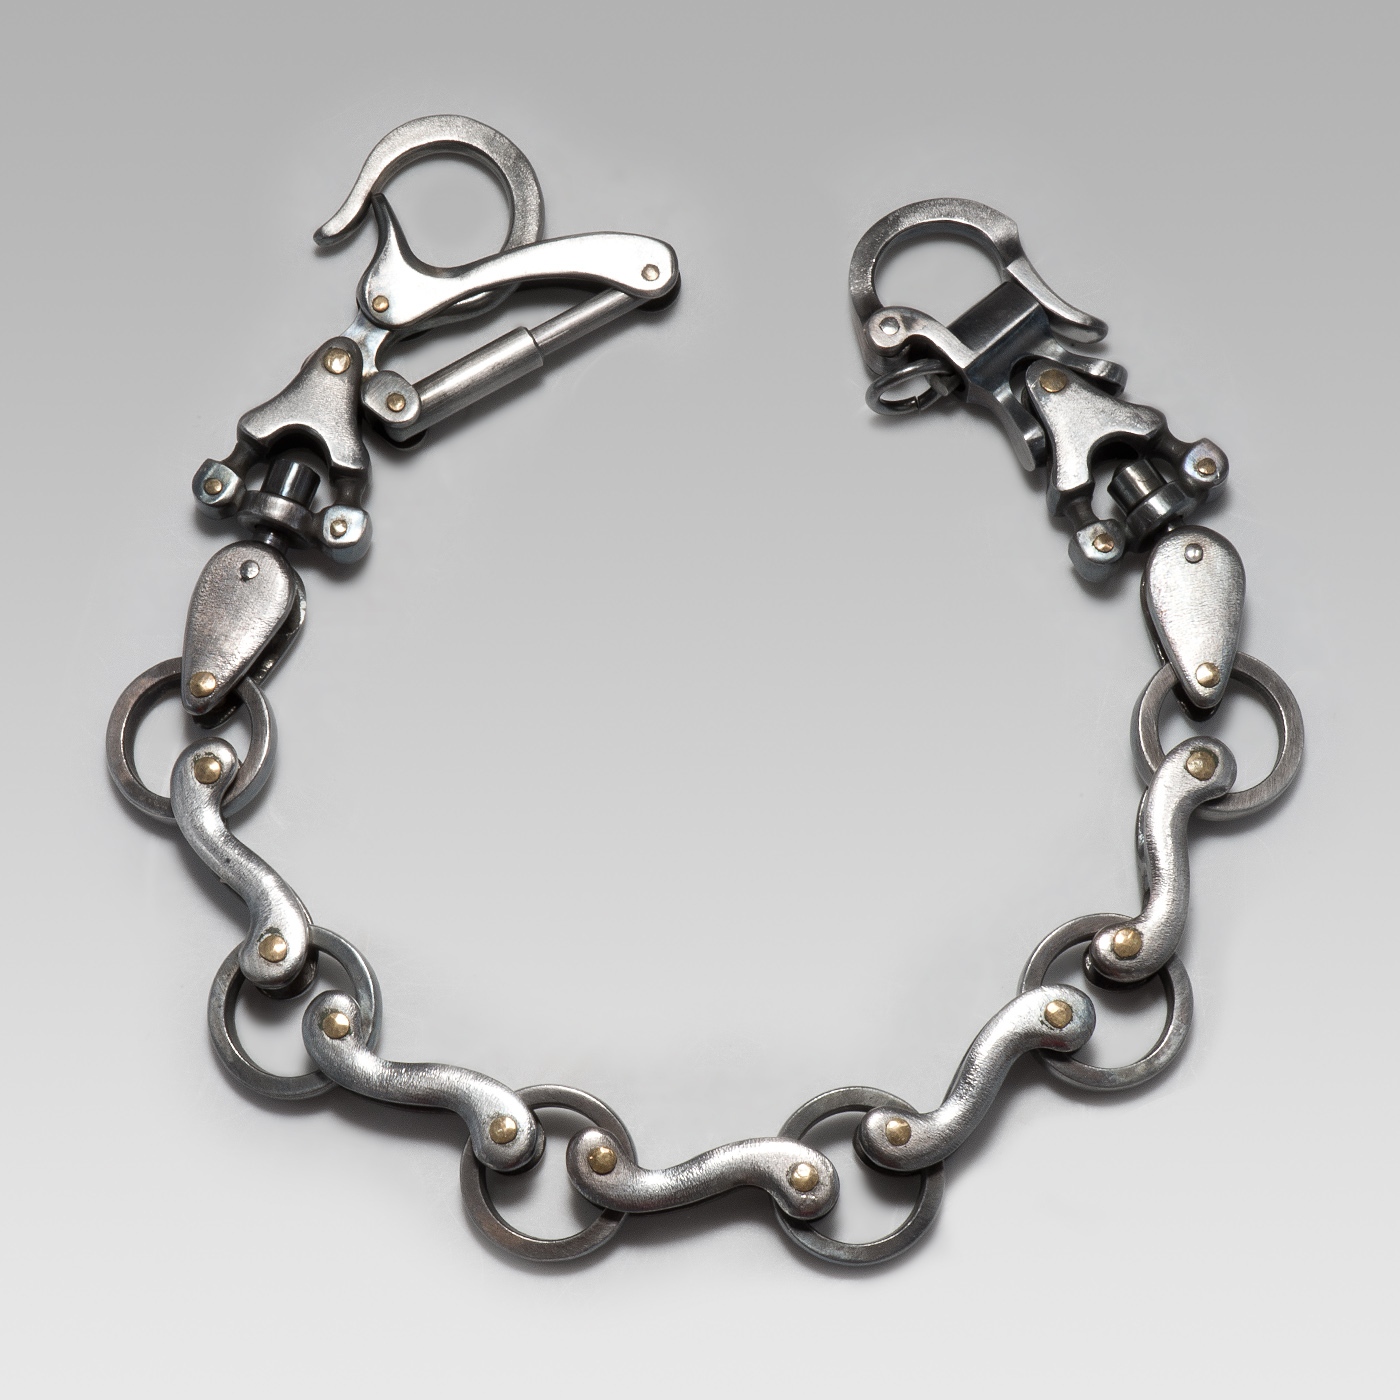 Caterpillar | Wallet Chains by Nakayama Hidetoshi | Online Boutique Oz  Abstract Tokyo, Japan